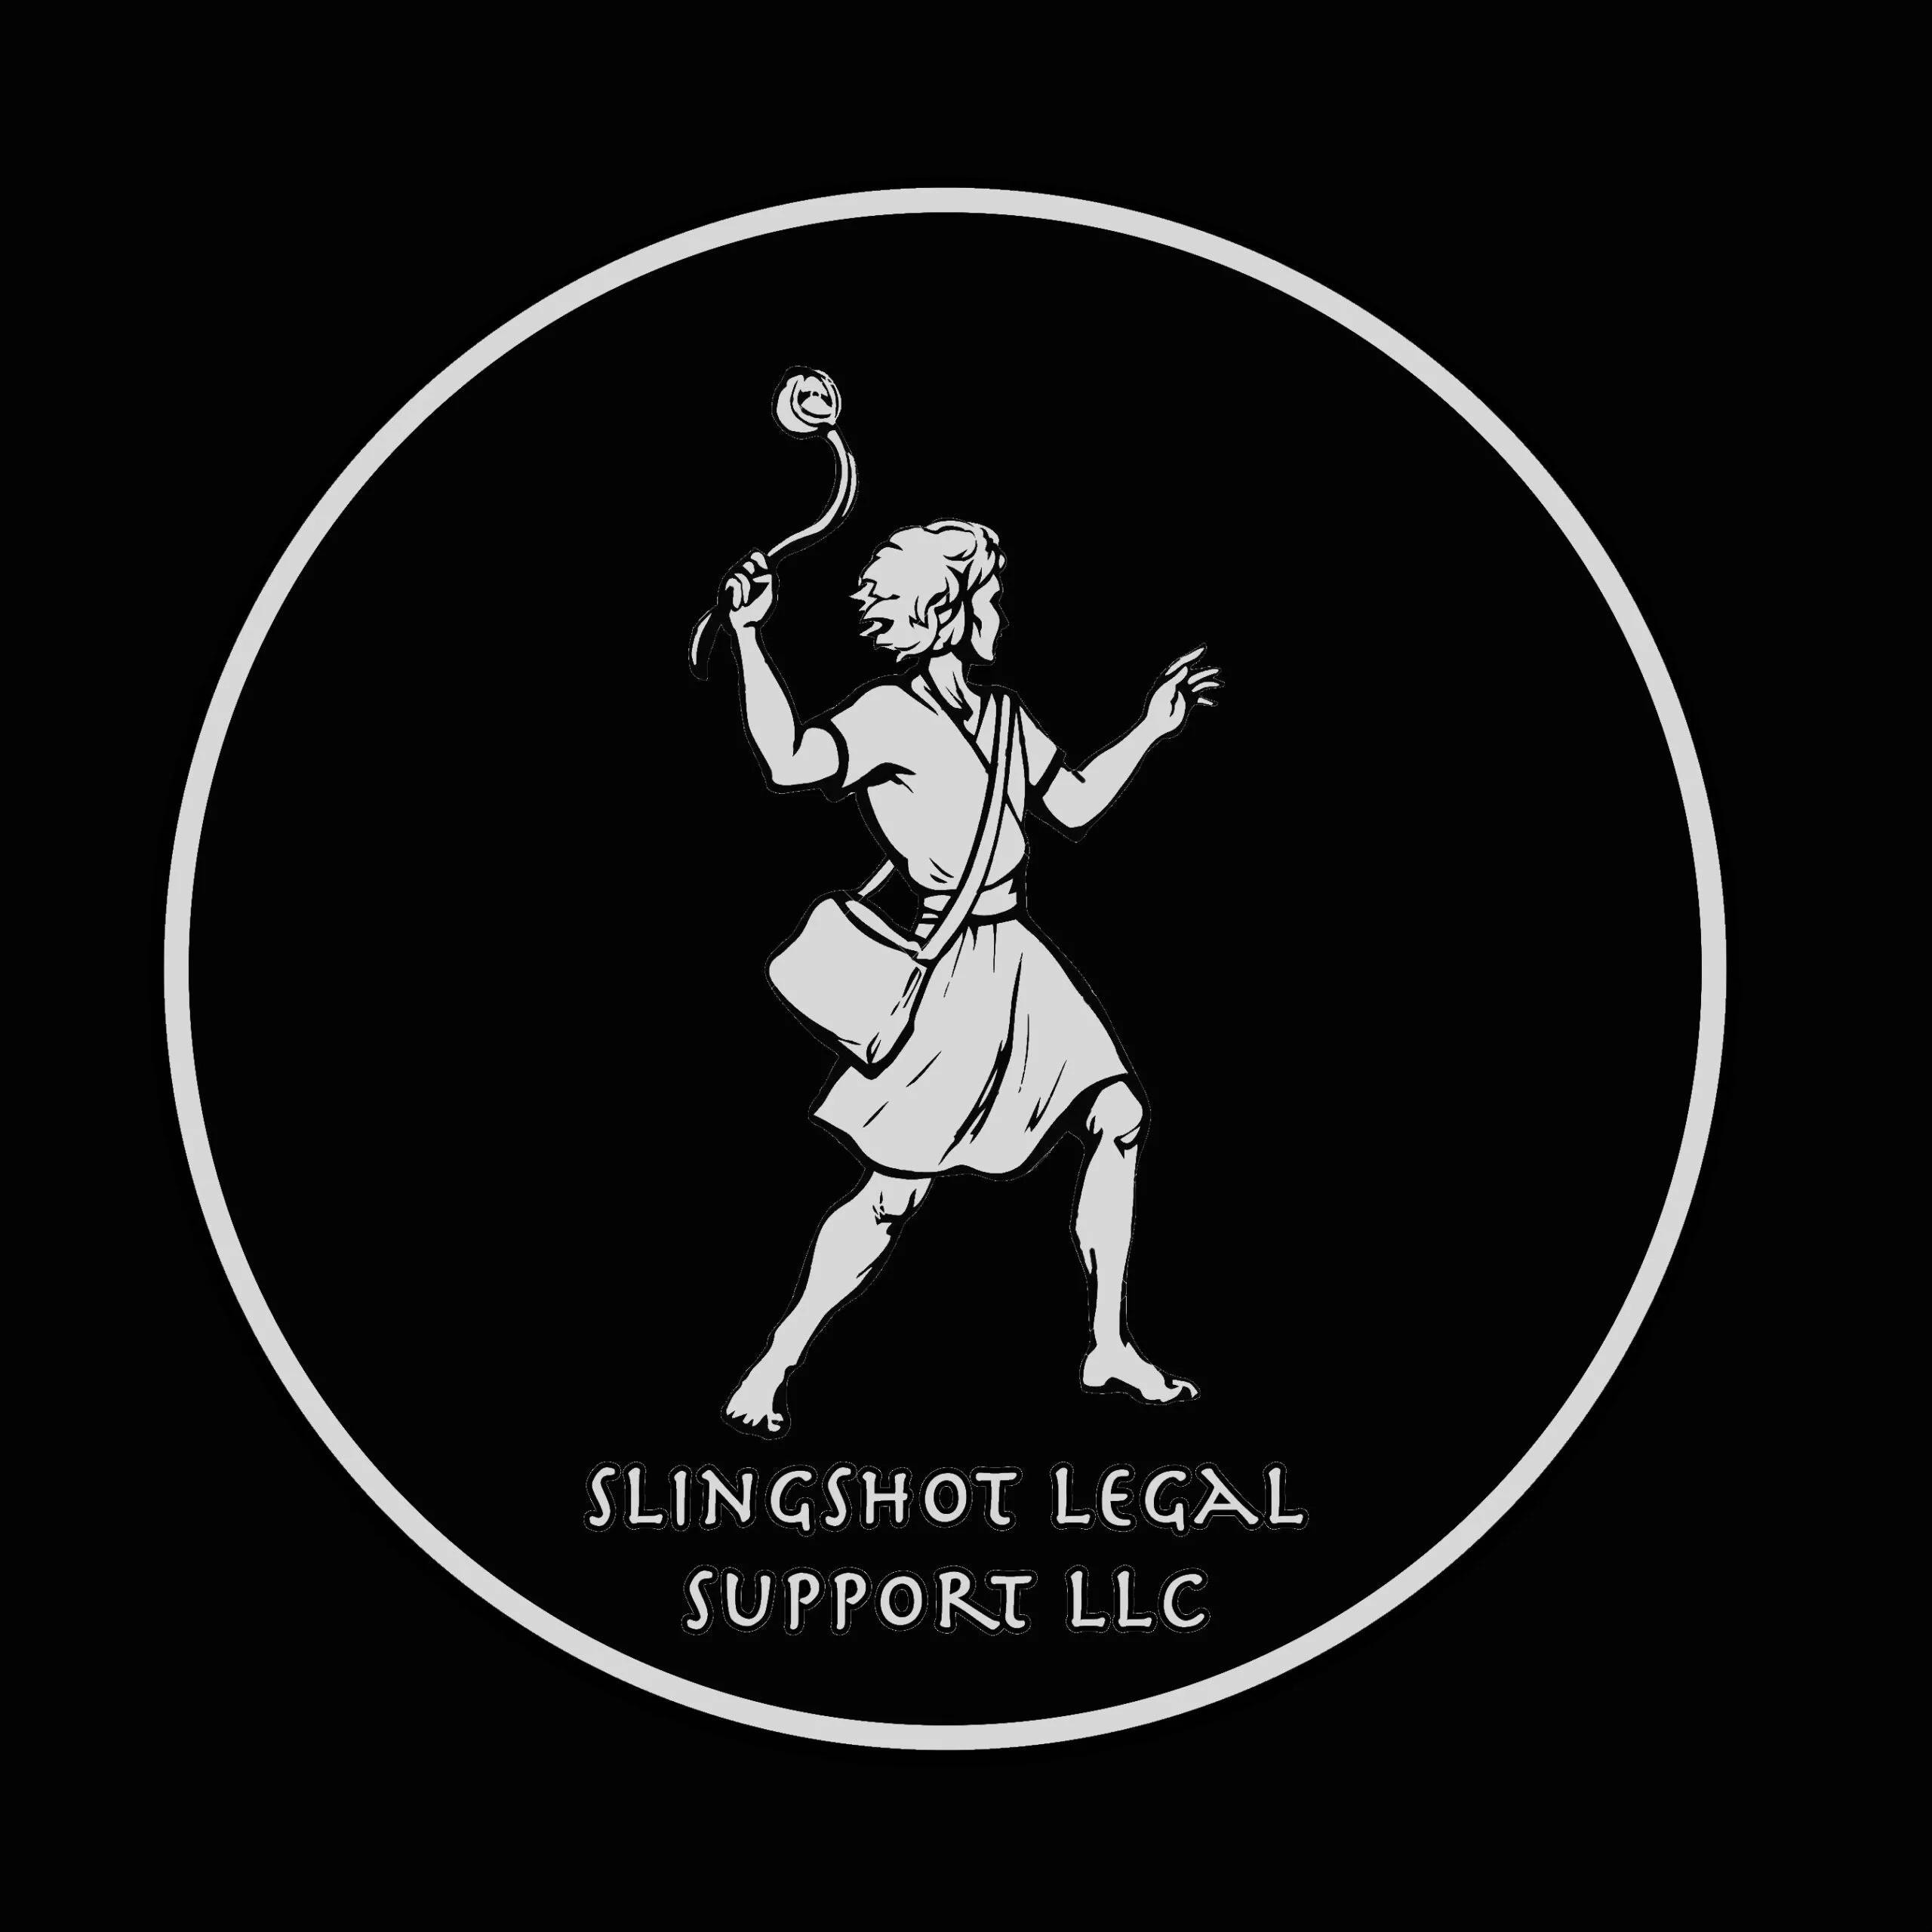 black page with a white logo featuring a female hurling a slingshot